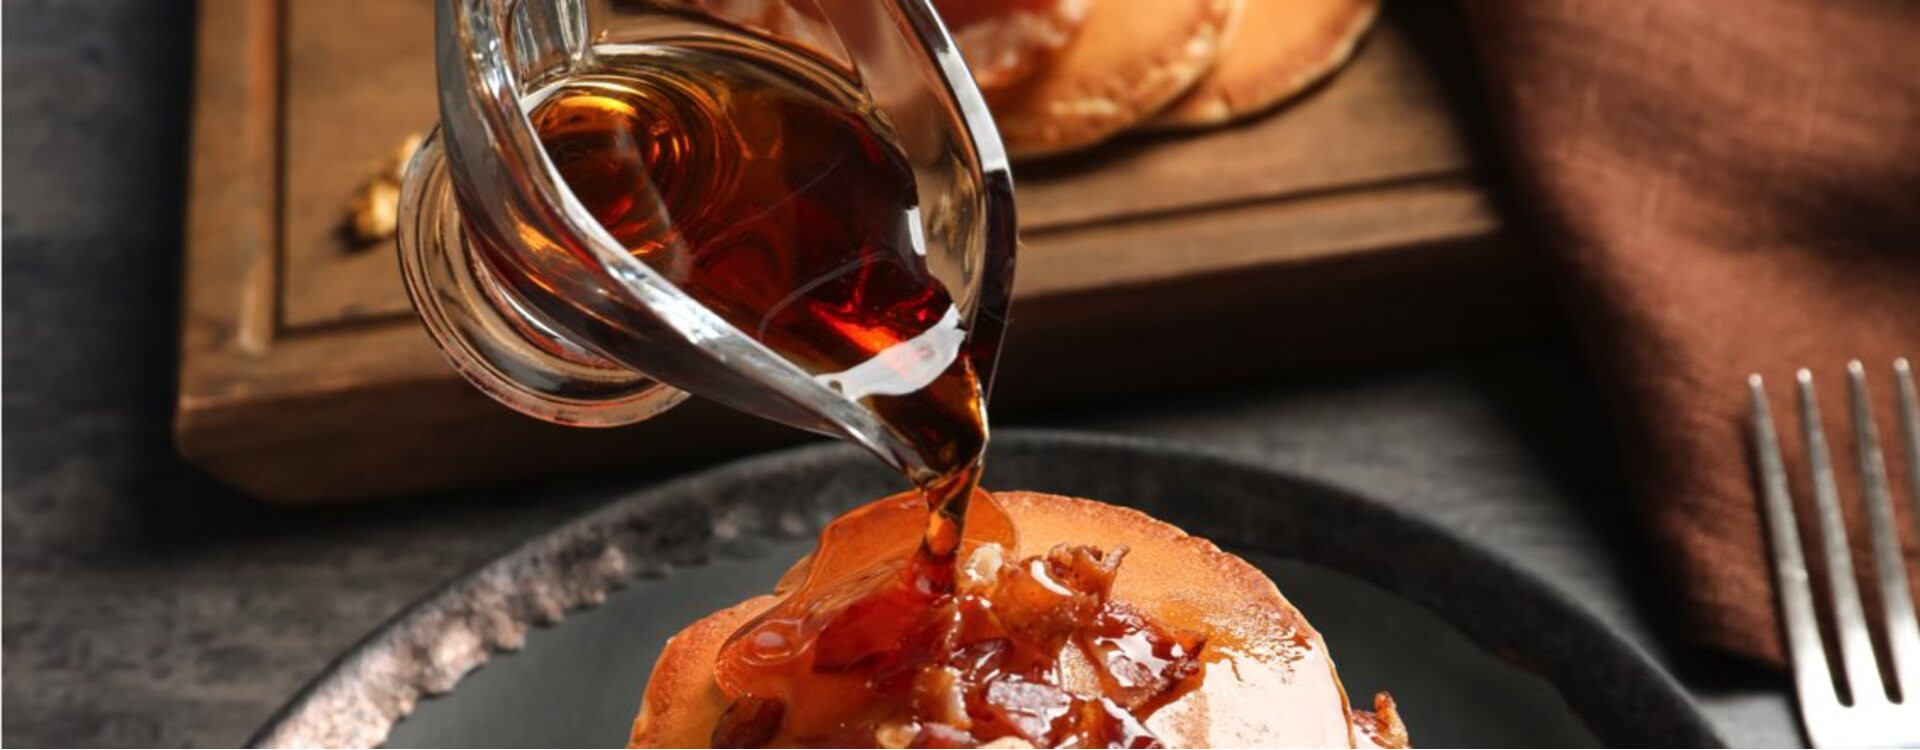 Agave syrup or maple syrup: how to make sure you make the right choice?